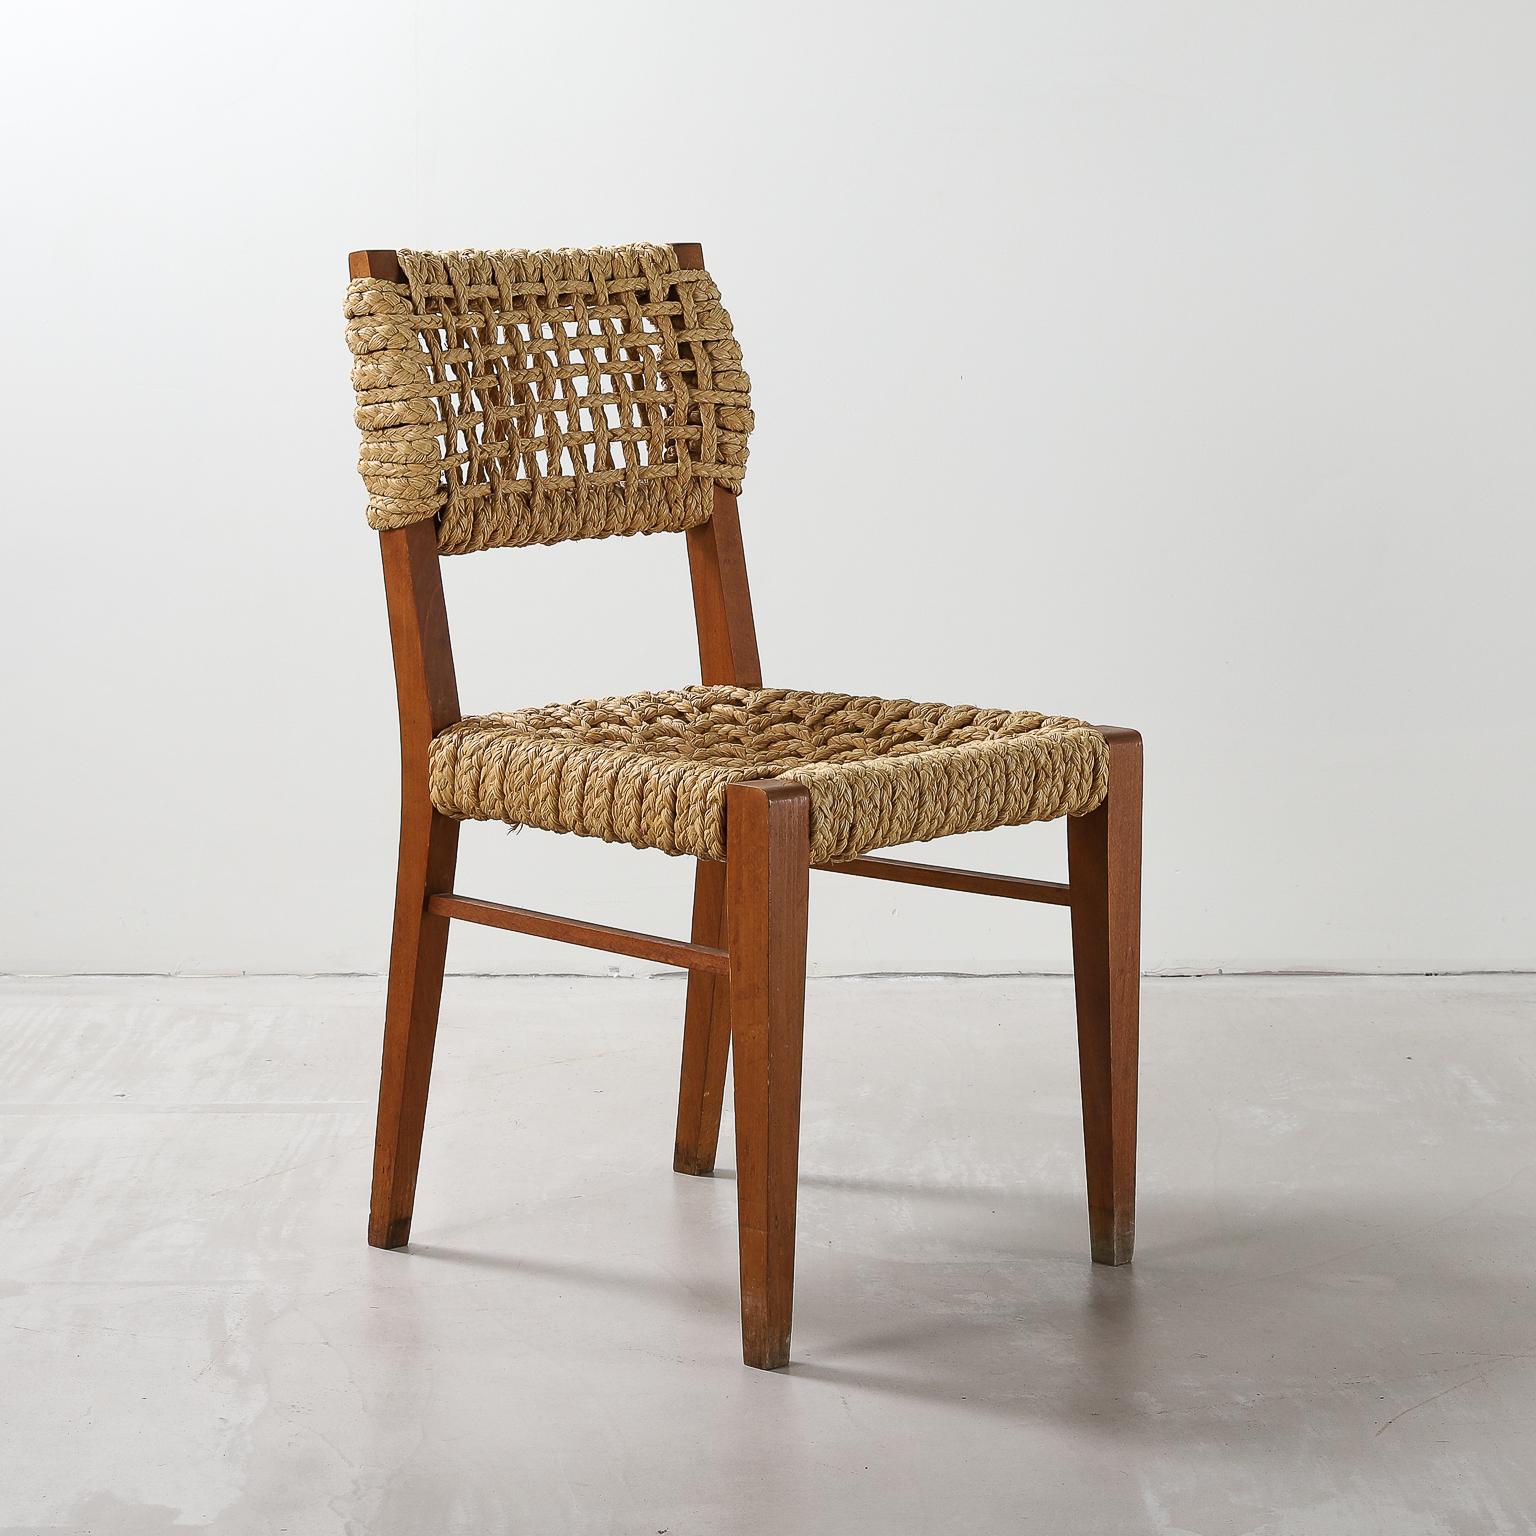 Mid-20th Century Pair of Beech & Woven Rope Dining Chairs by Adrien Audoux and Frida Minet, 1950s